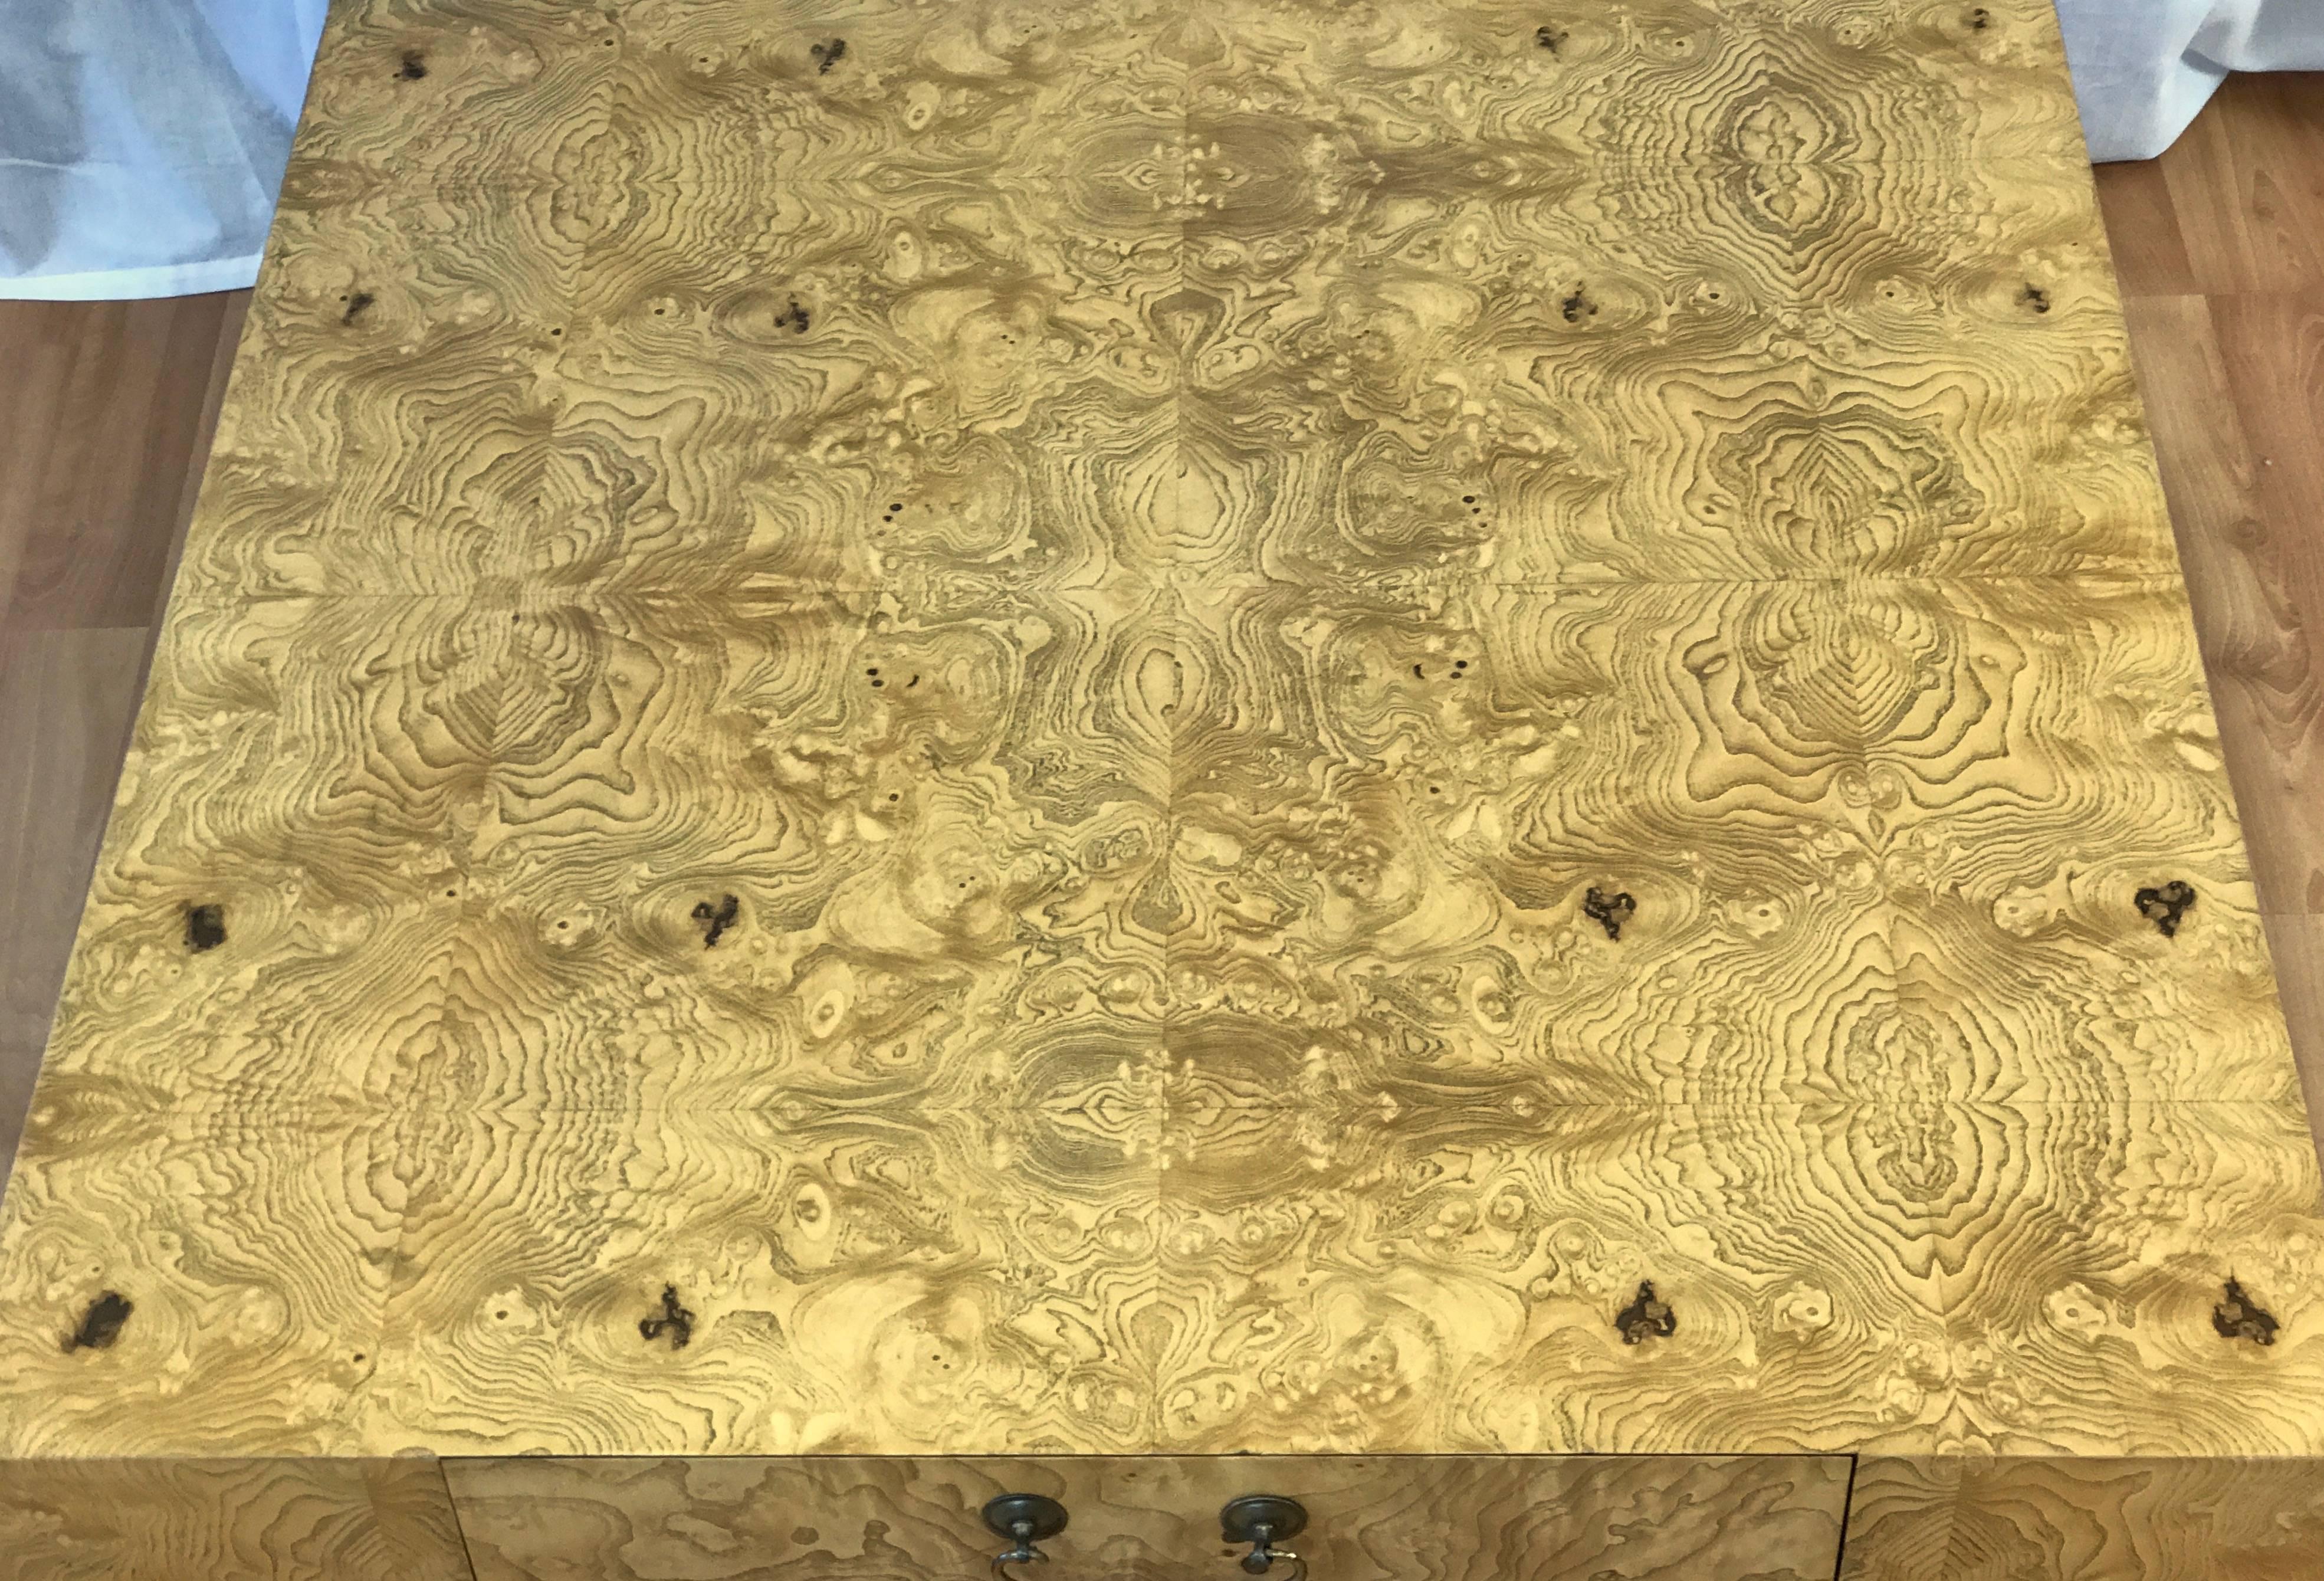 American Large Burl Wood Coffee Table with Drawers Attributed to Henredon